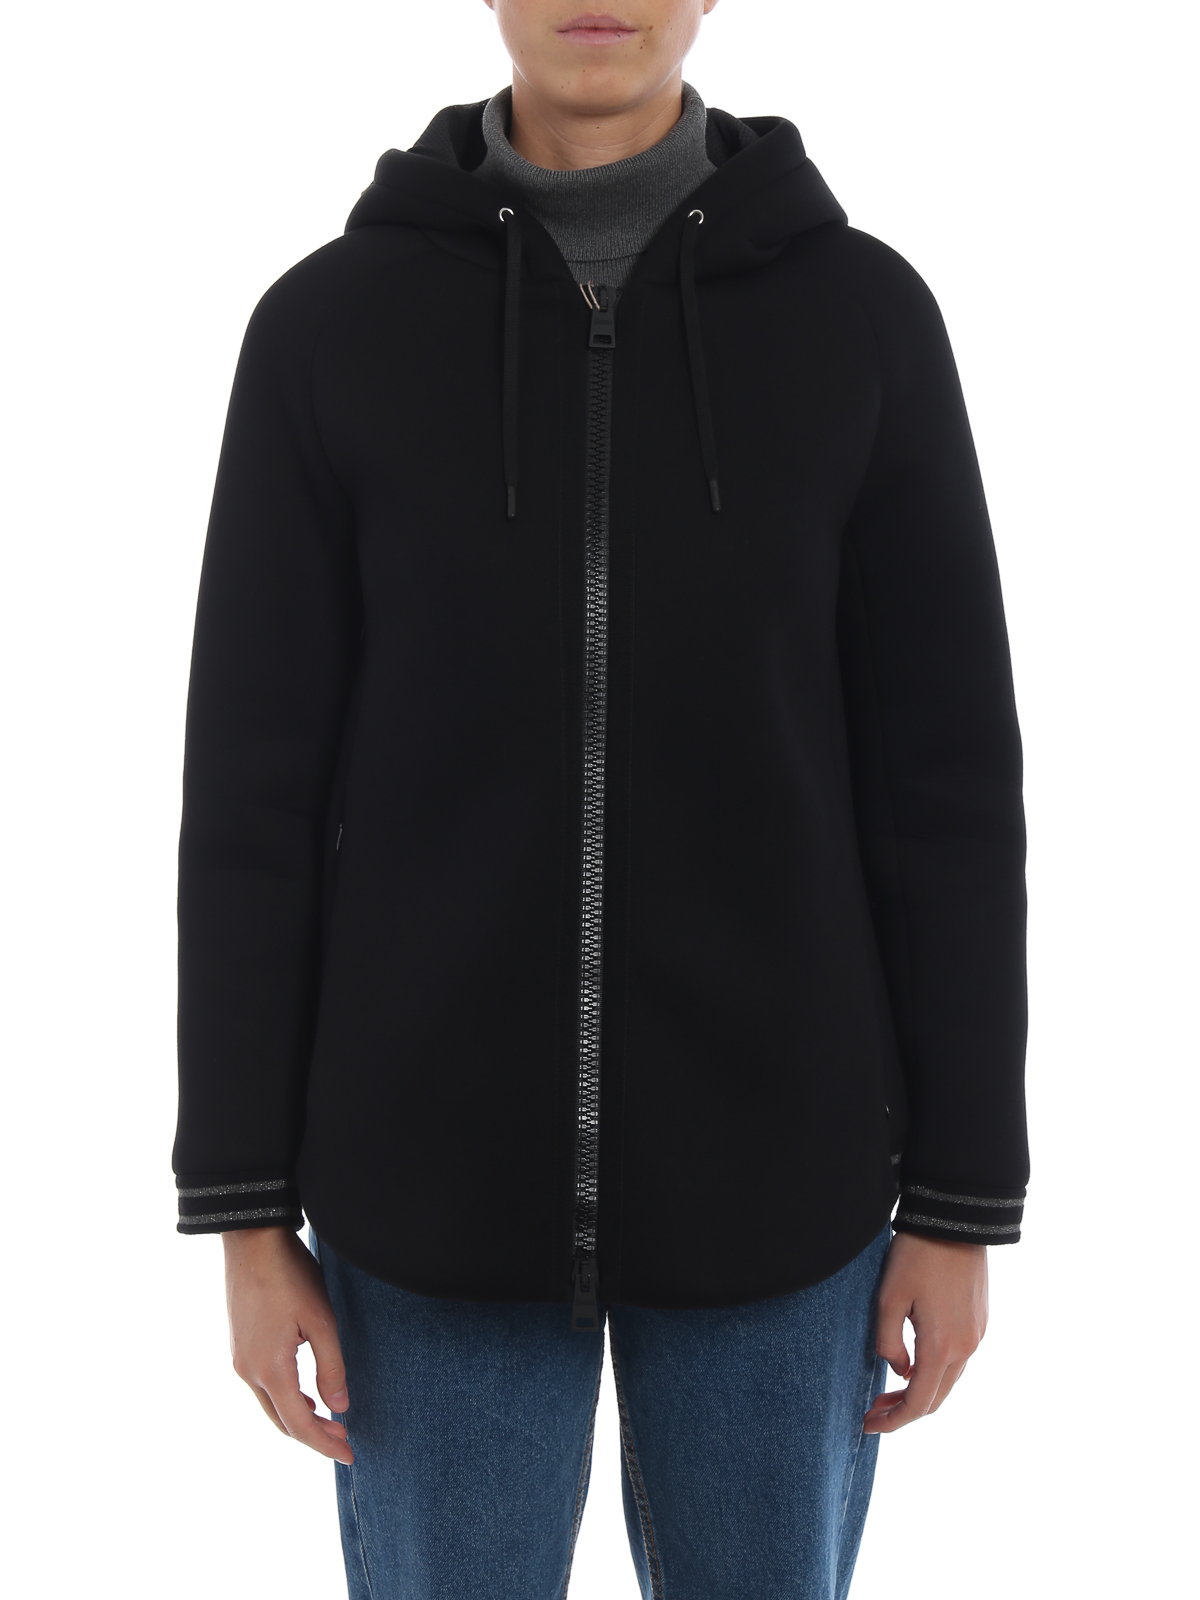 Flotar Percepción Gobernable Casual jackets Herno - Neoprene hooded jacket with rib-knitted edges -  GC007DR124009393